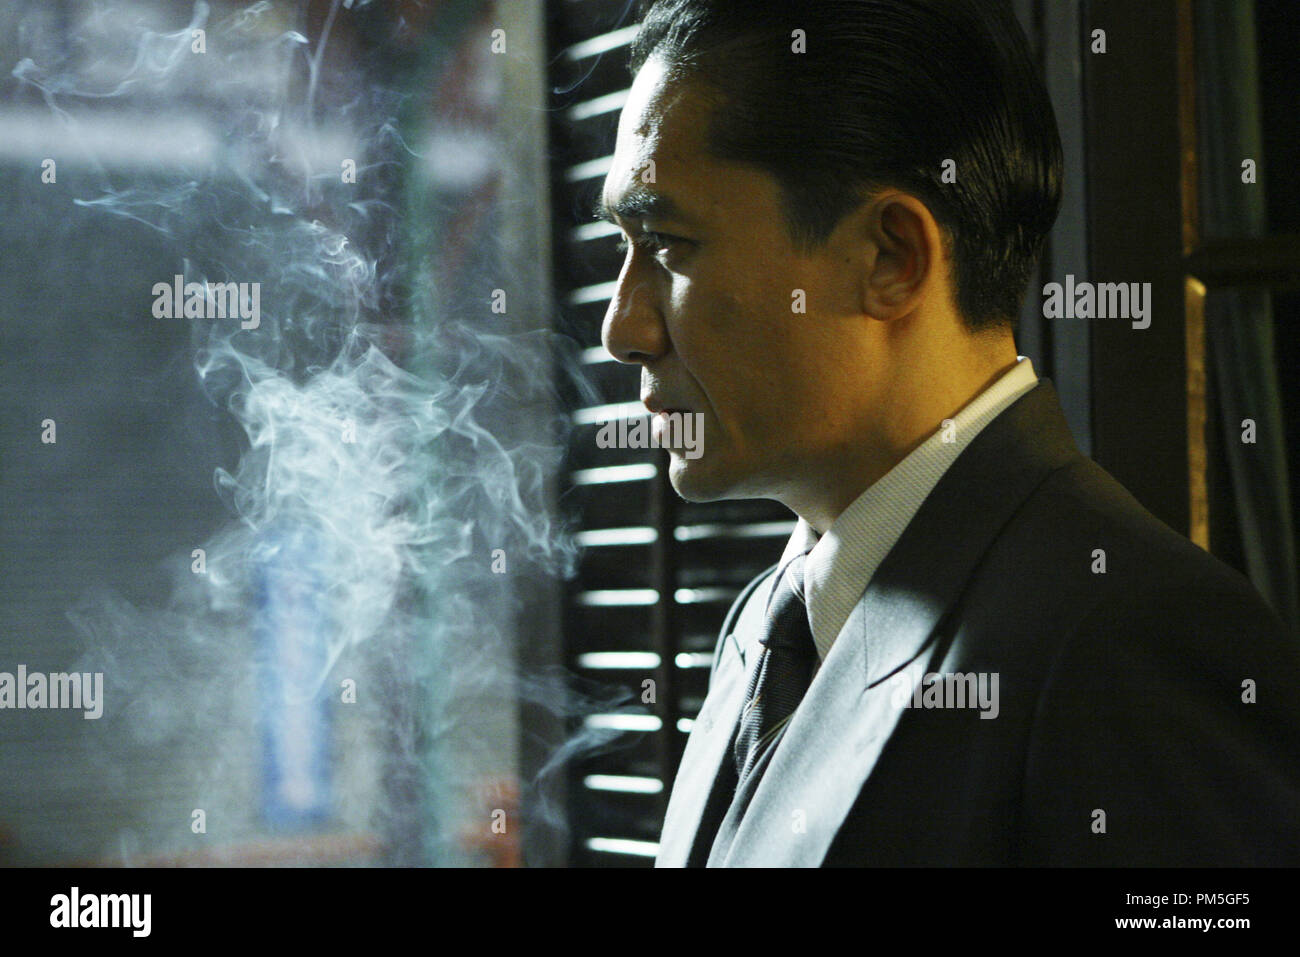 Film Still from 'Lust, Caution' (aka 'Se, jie') Tony Leung Chiu Wai © 2007 Focus Features Photo credit: Chan Kam Chuen   File Reference # 30738245THA  For Editorial Use Only -  All Rights Reserved Stock Photo